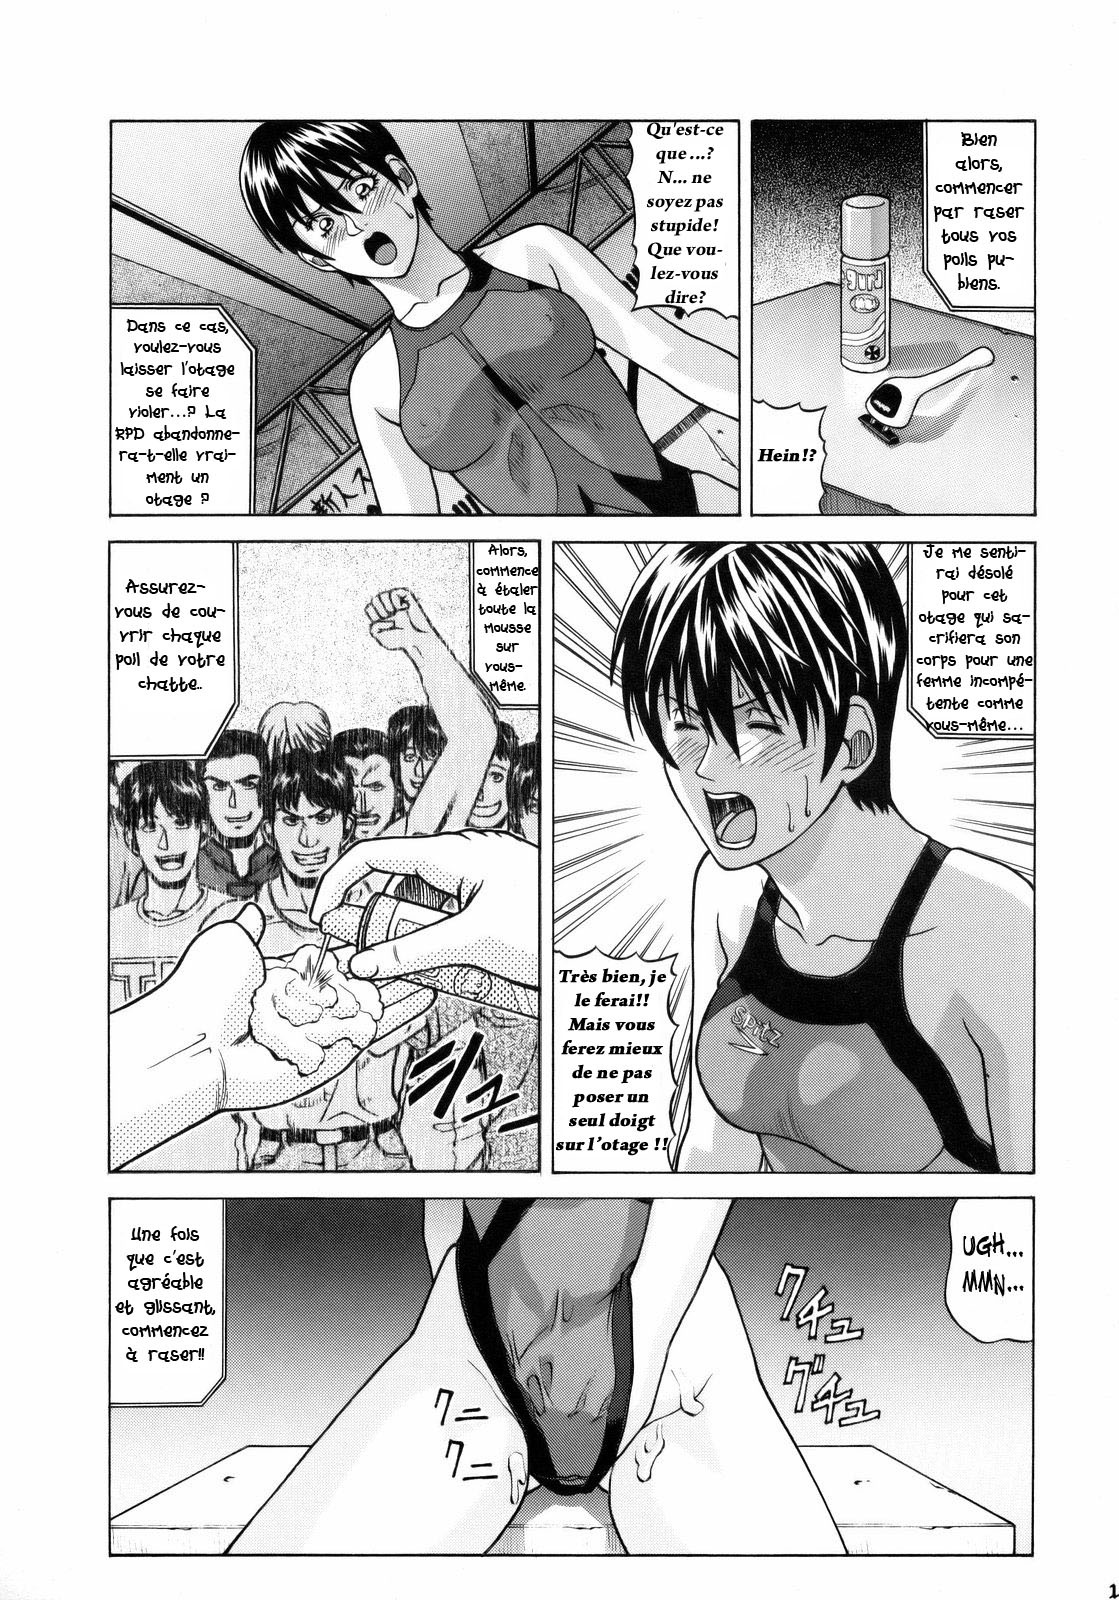 (C75) [Human High-Light Film (Jacky Knee-san)] Rebecca Chambers (Resident Evil) [French] page 18 full